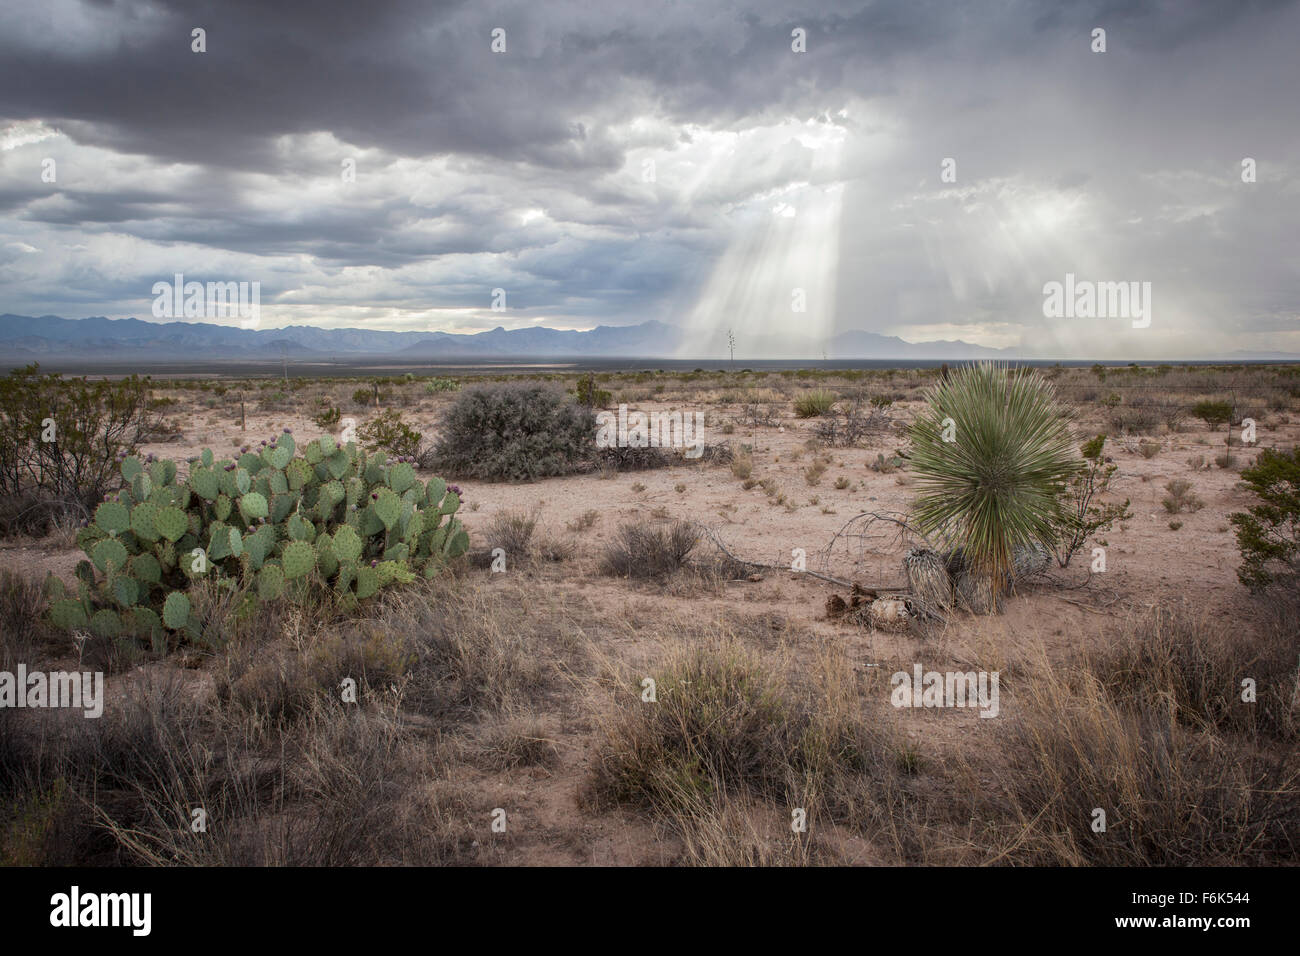 Crepuscular rays piercing through the clouds of an incoming storm in a New Mexican desert. Stock Photo